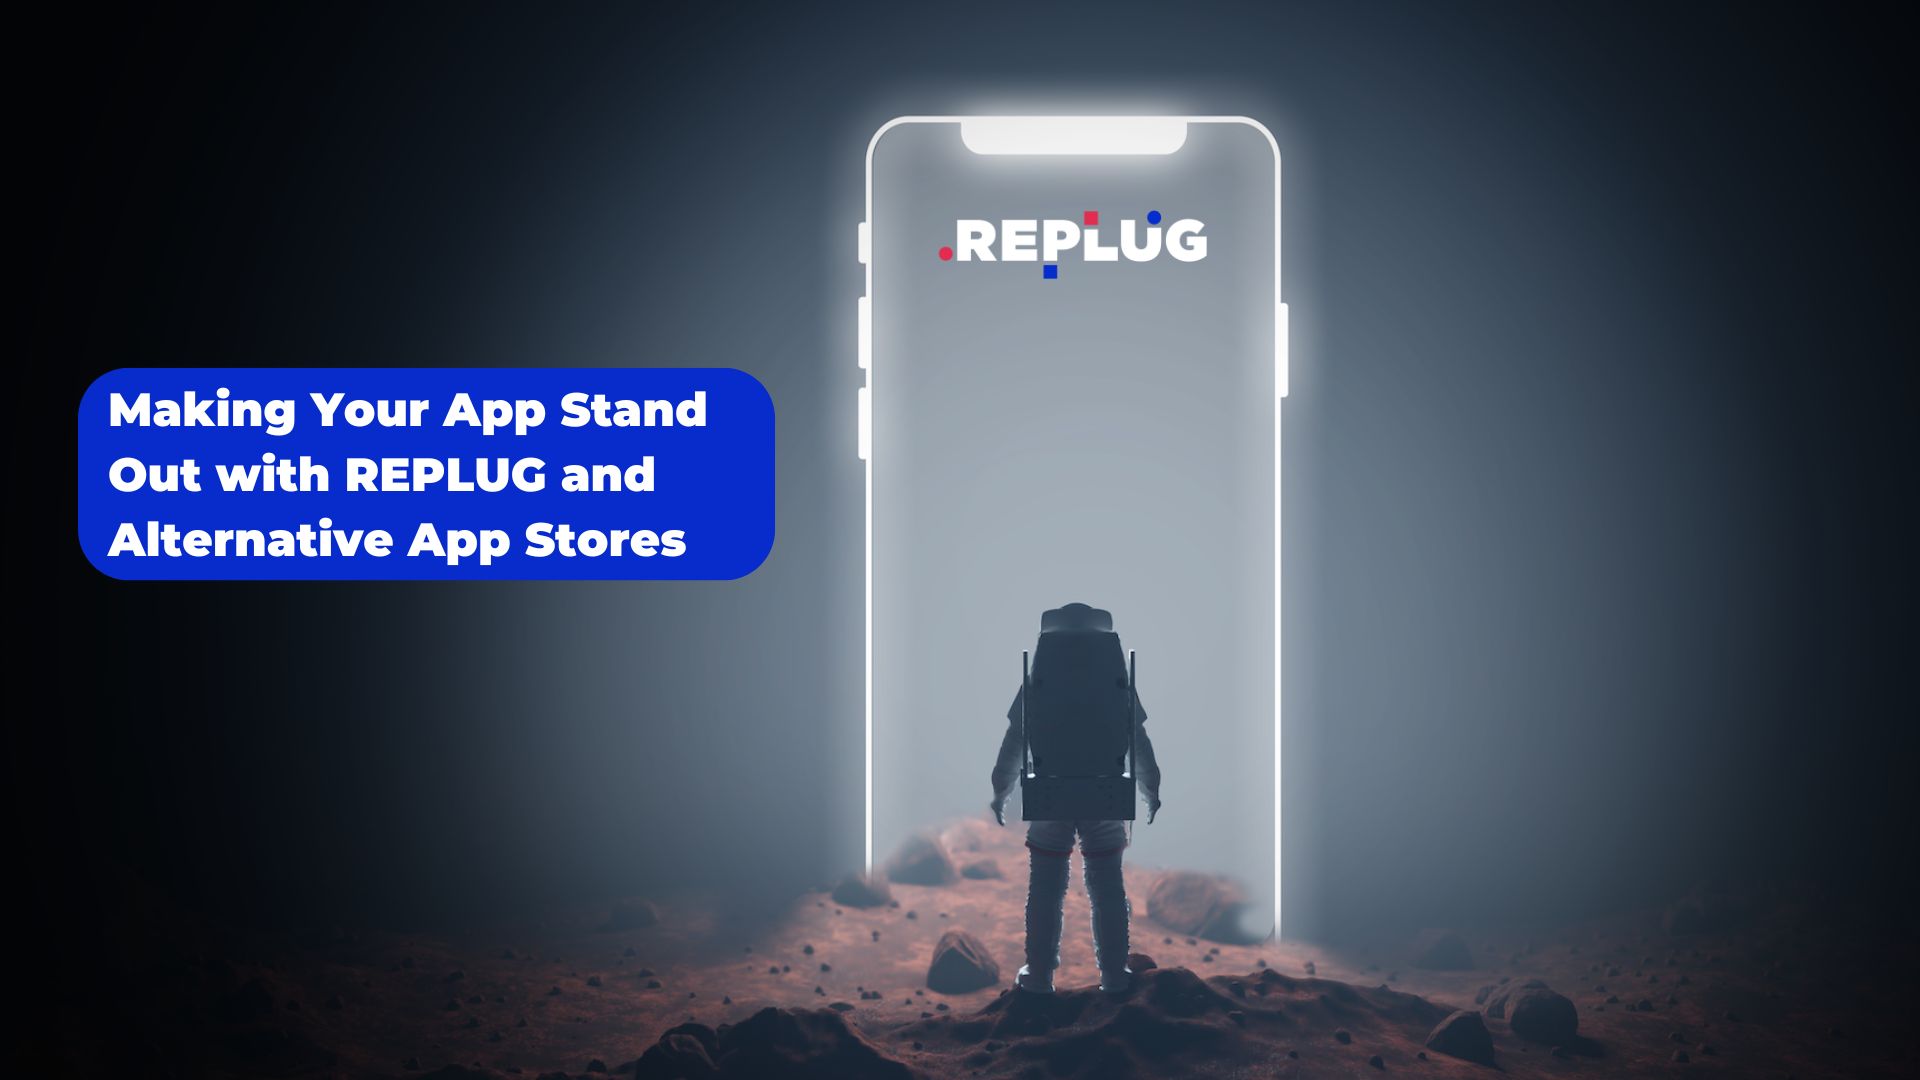 Making Your App Stand Out with REPLUG and Alternative App Stores